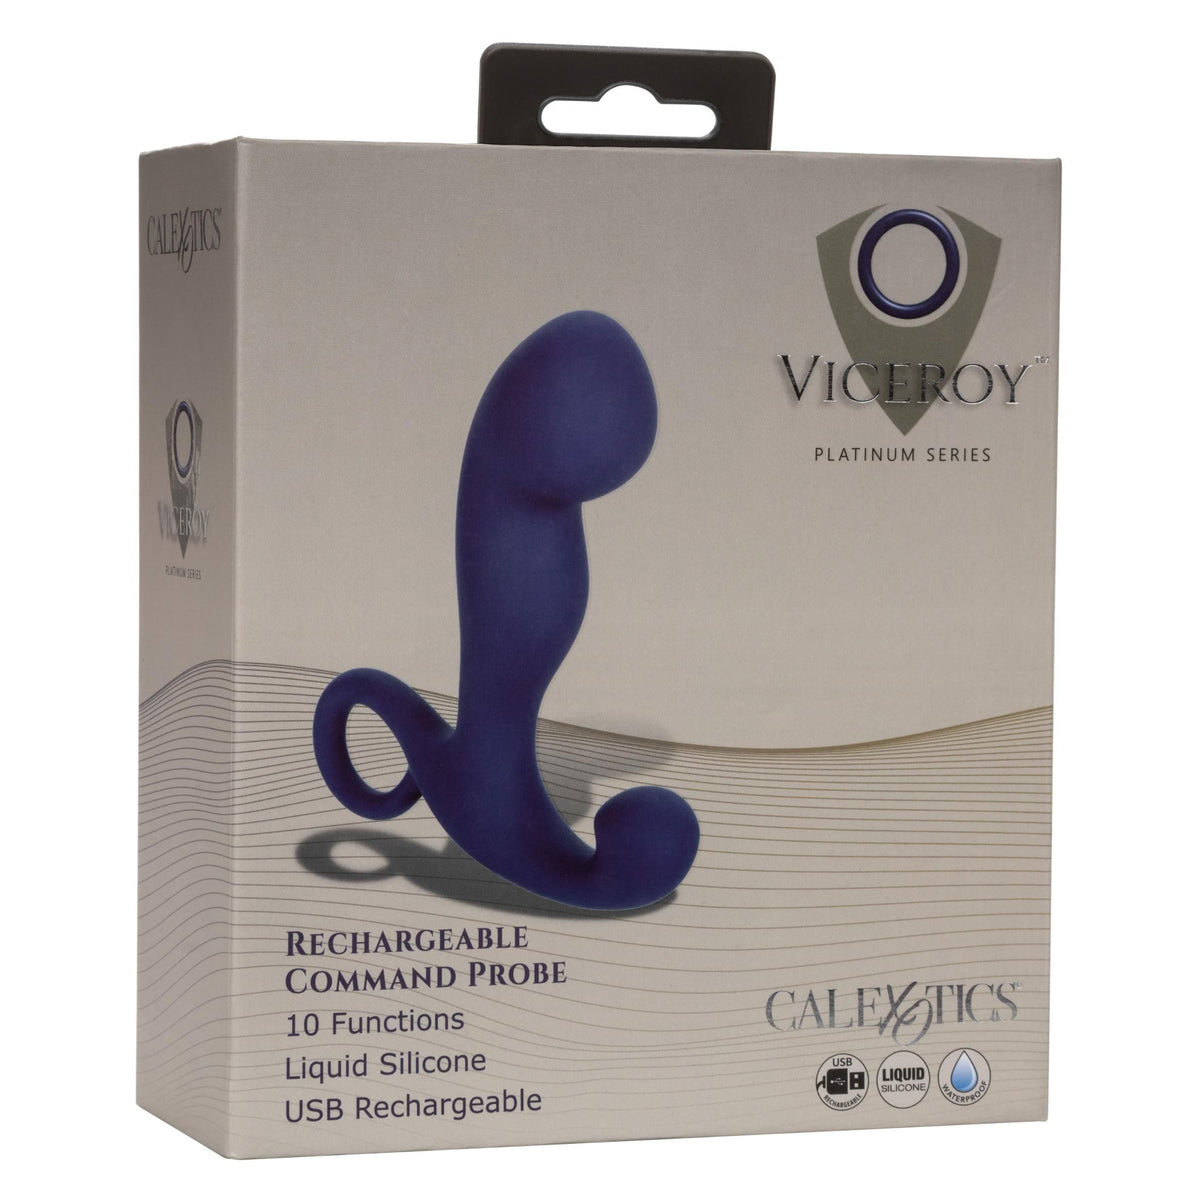 viceroy rechargeable command probe blue